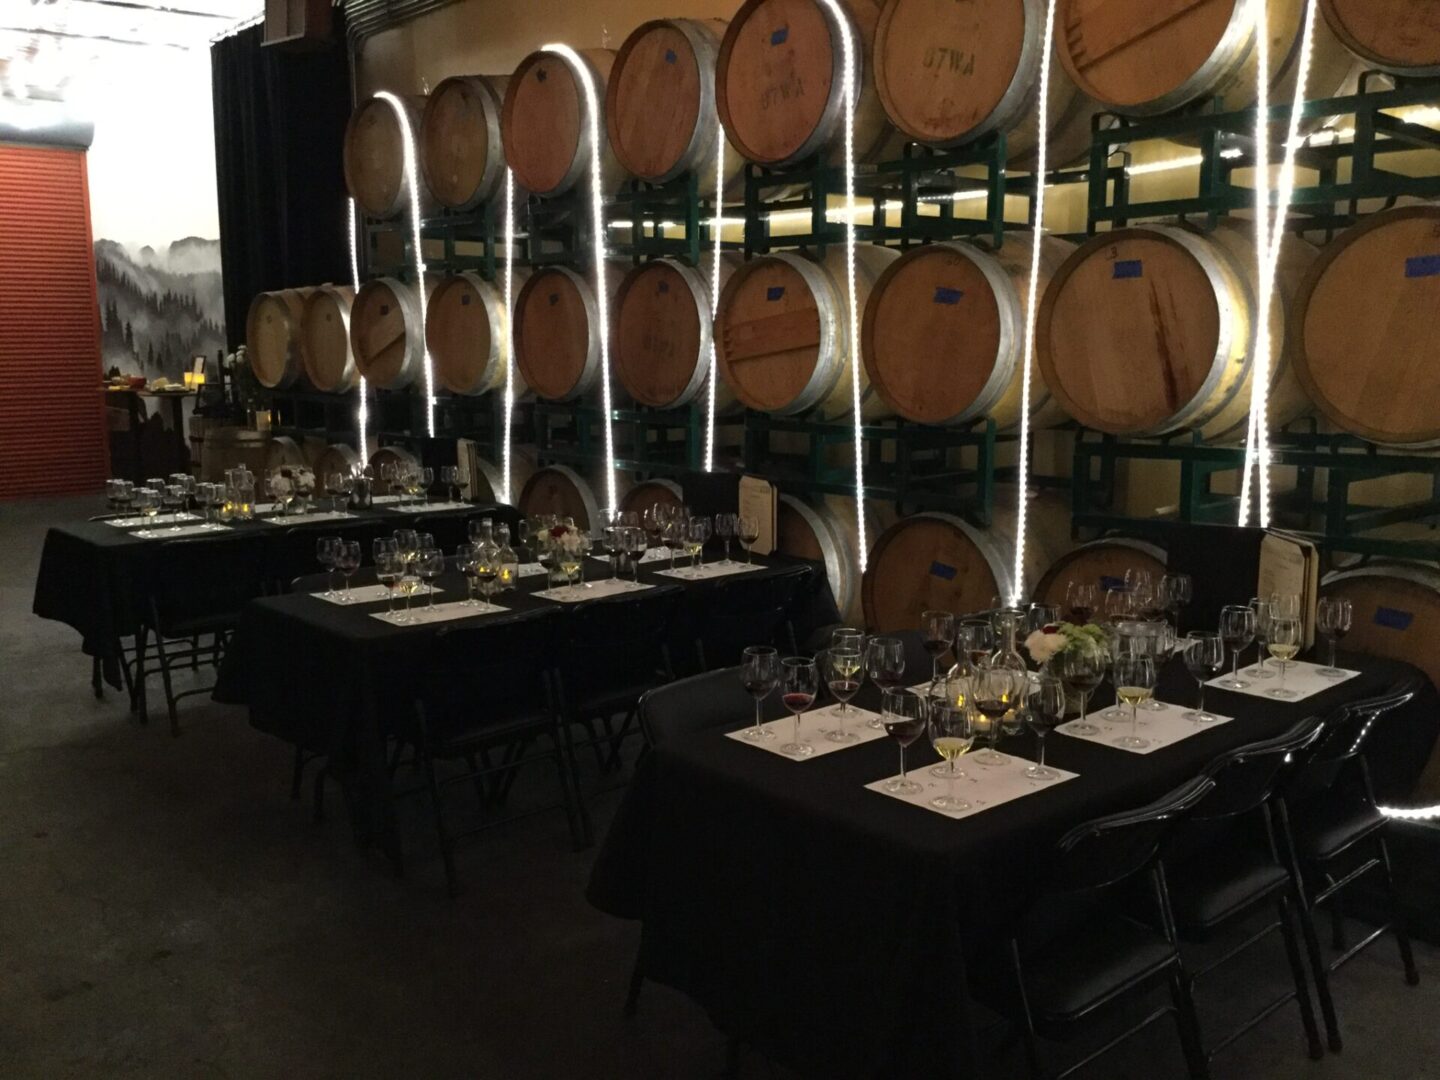 A room filled with tables and chairs next to wine barrels.